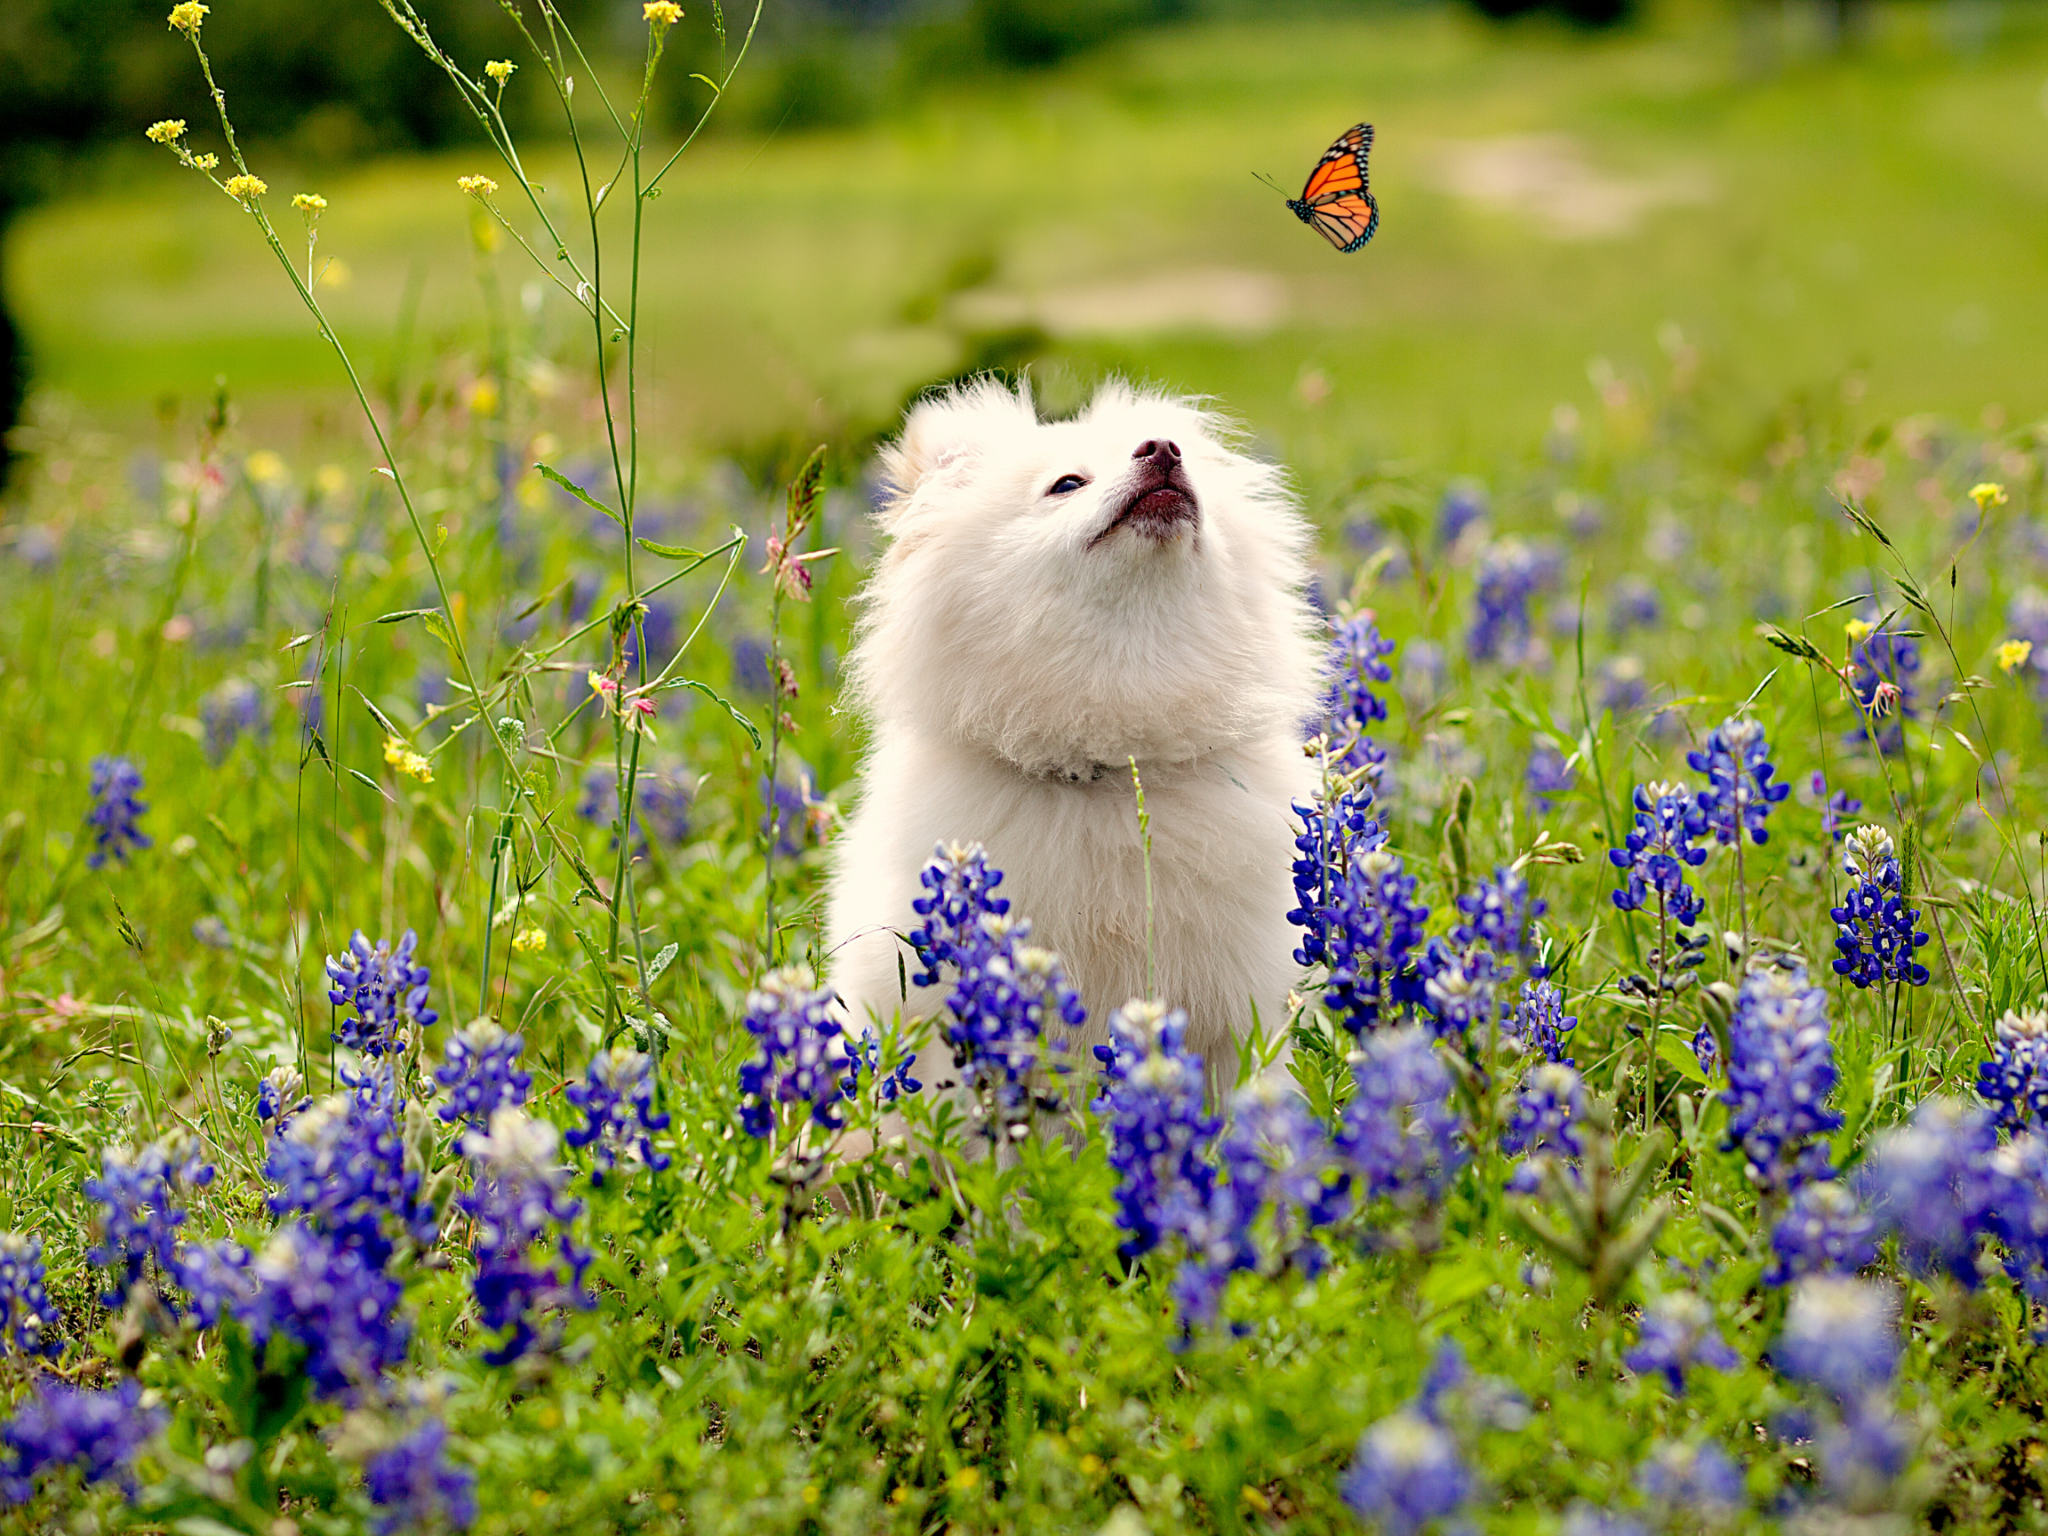 white fluffy dog looking up at orange butterfly while sitting in field of texas bluebonnet flowers